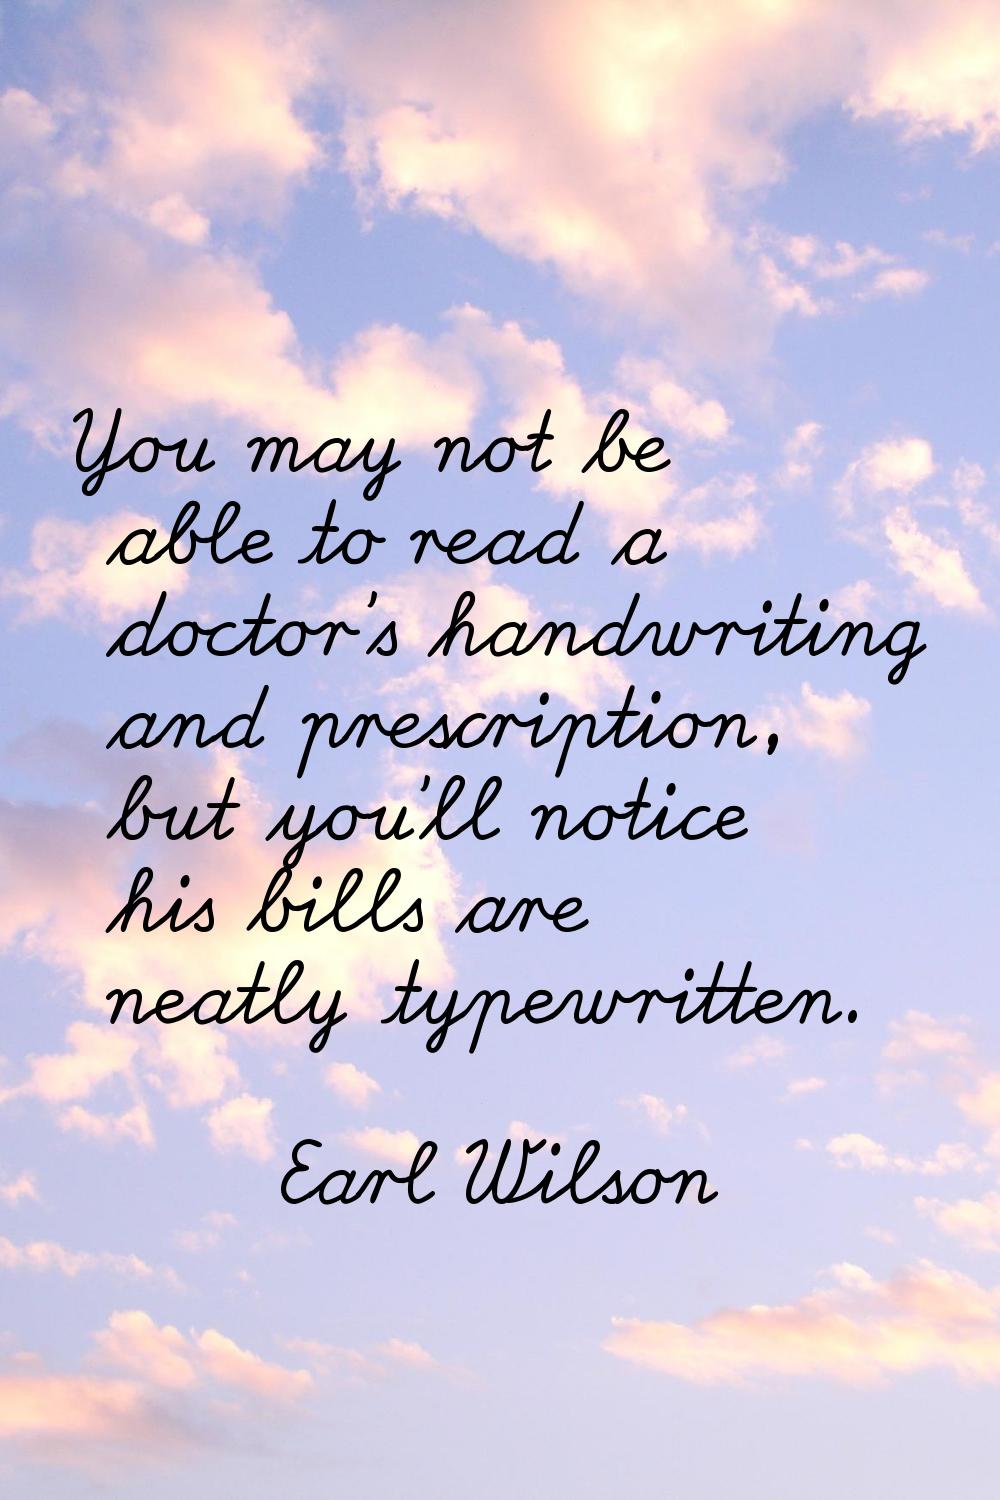 You may not be able to read a doctor's handwriting and prescription, but you'll notice his bills ar